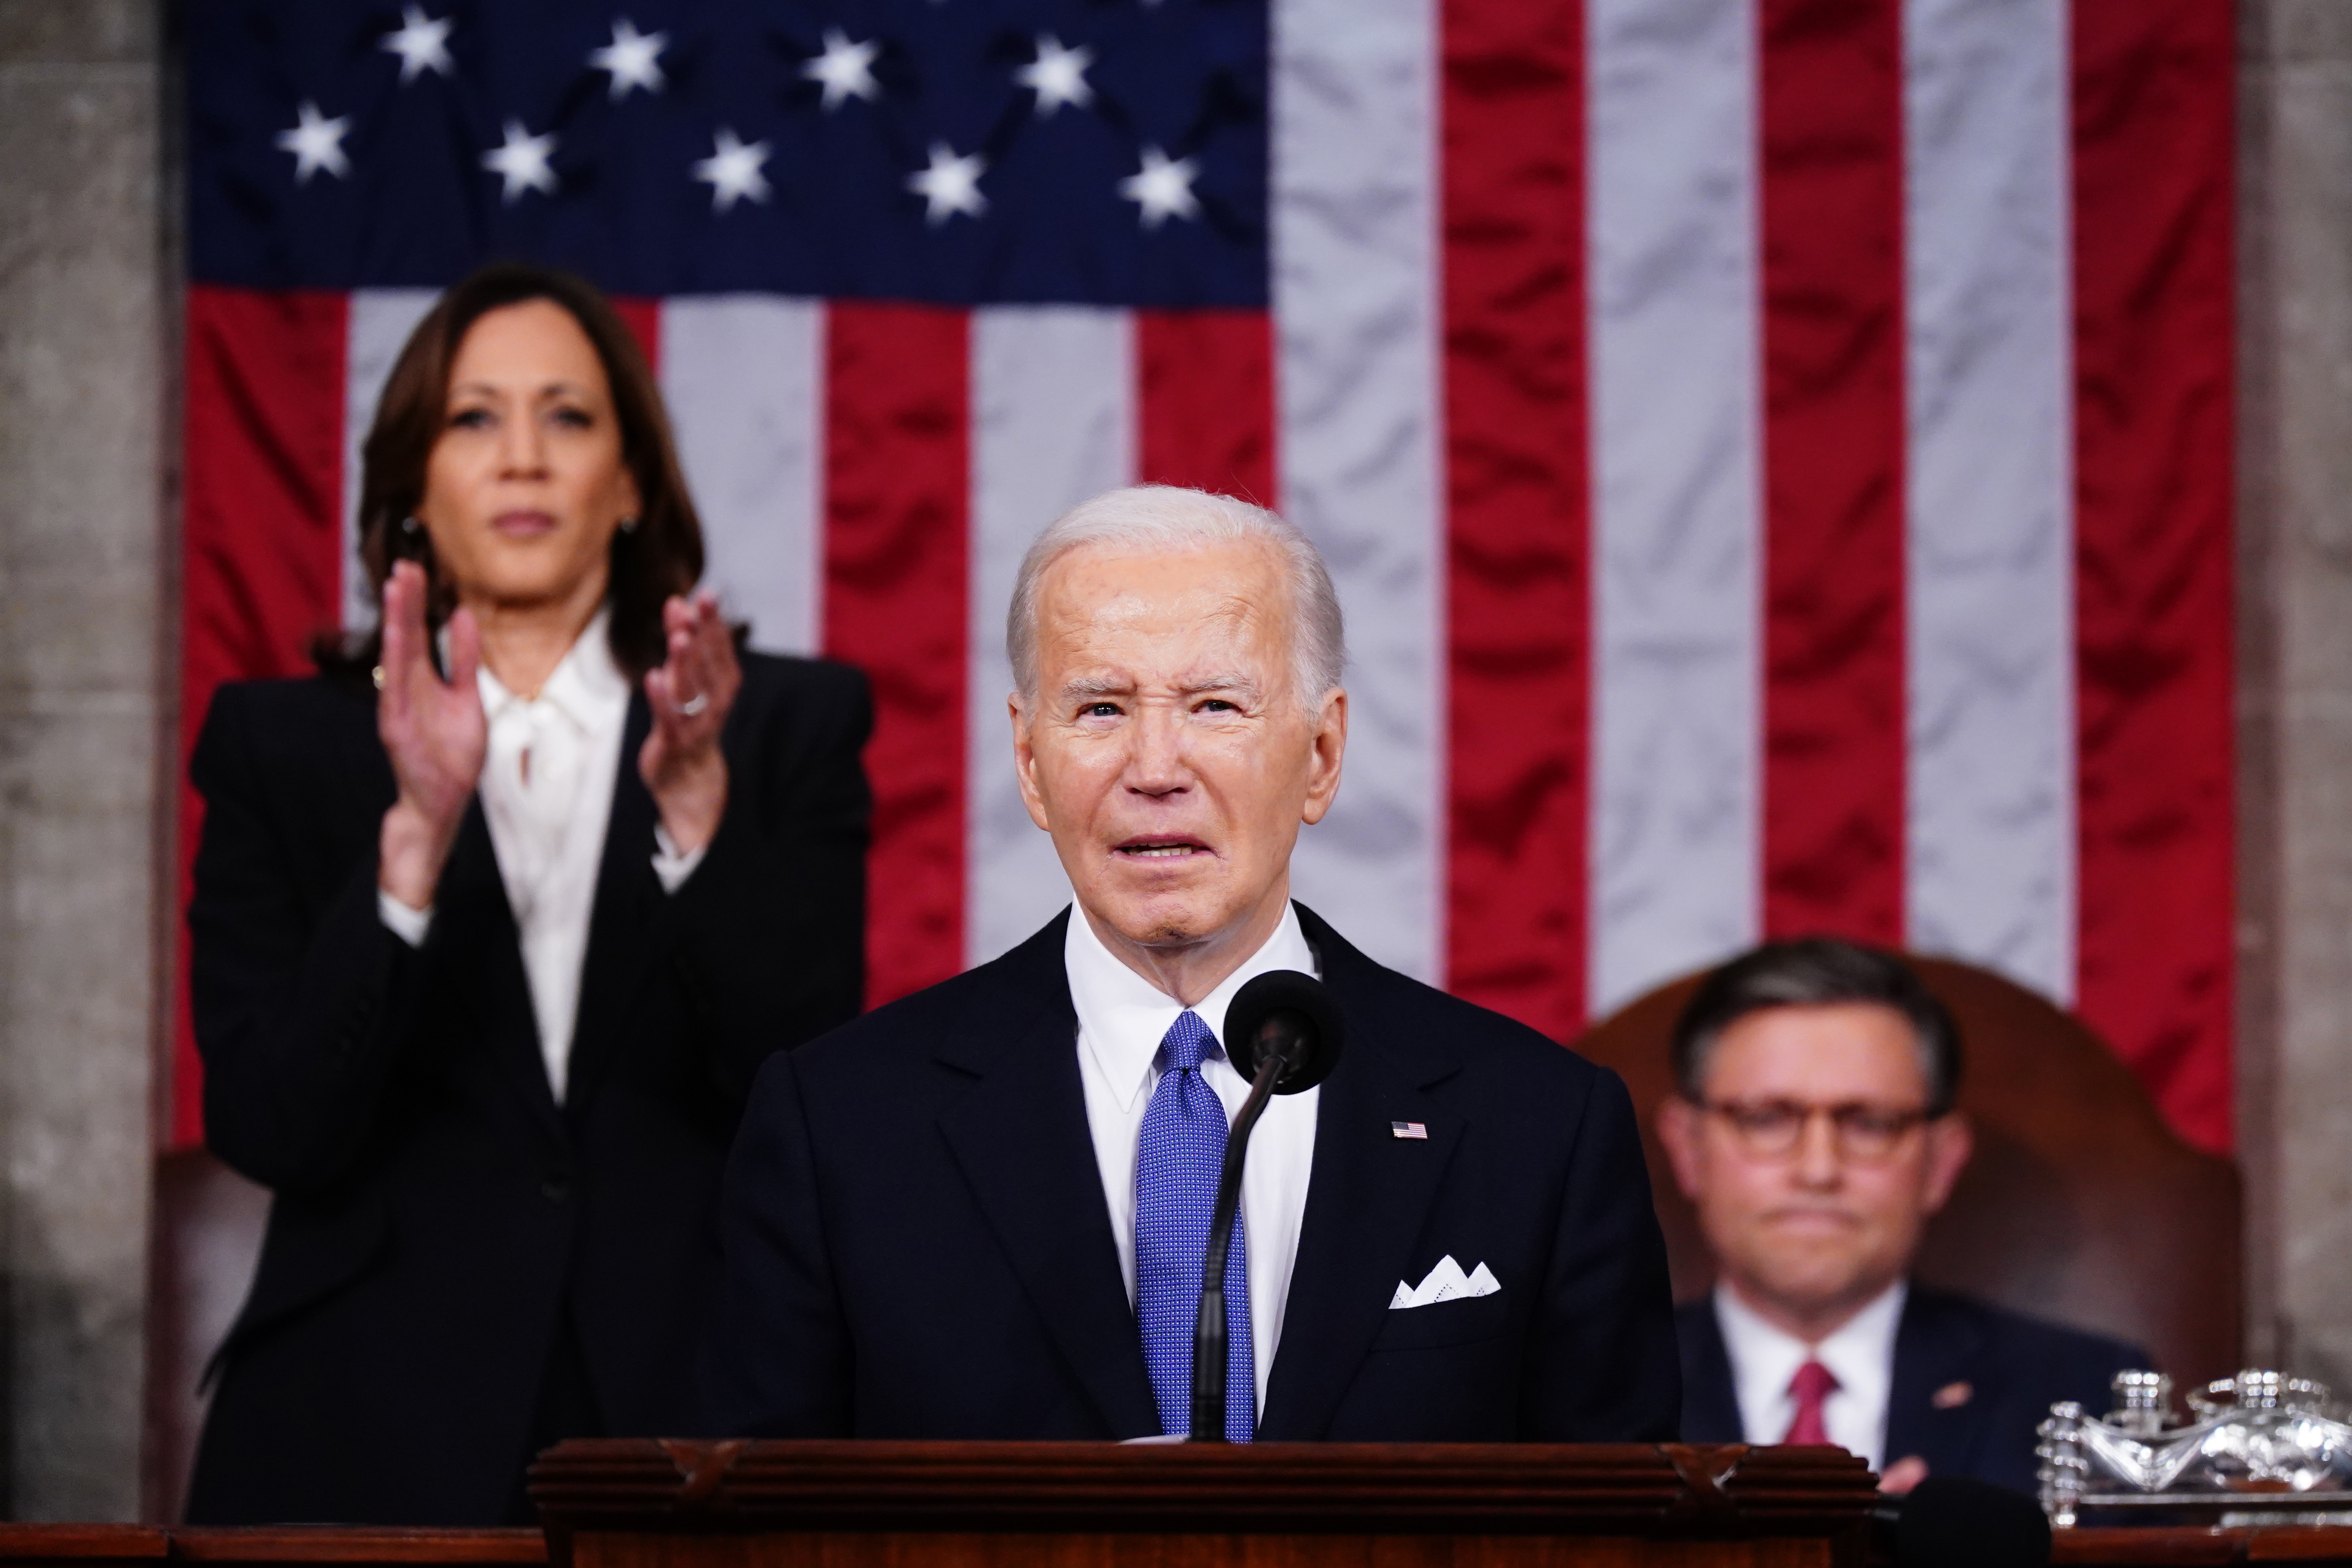  Biden's State of the Union gave Democrats hope but not much else 